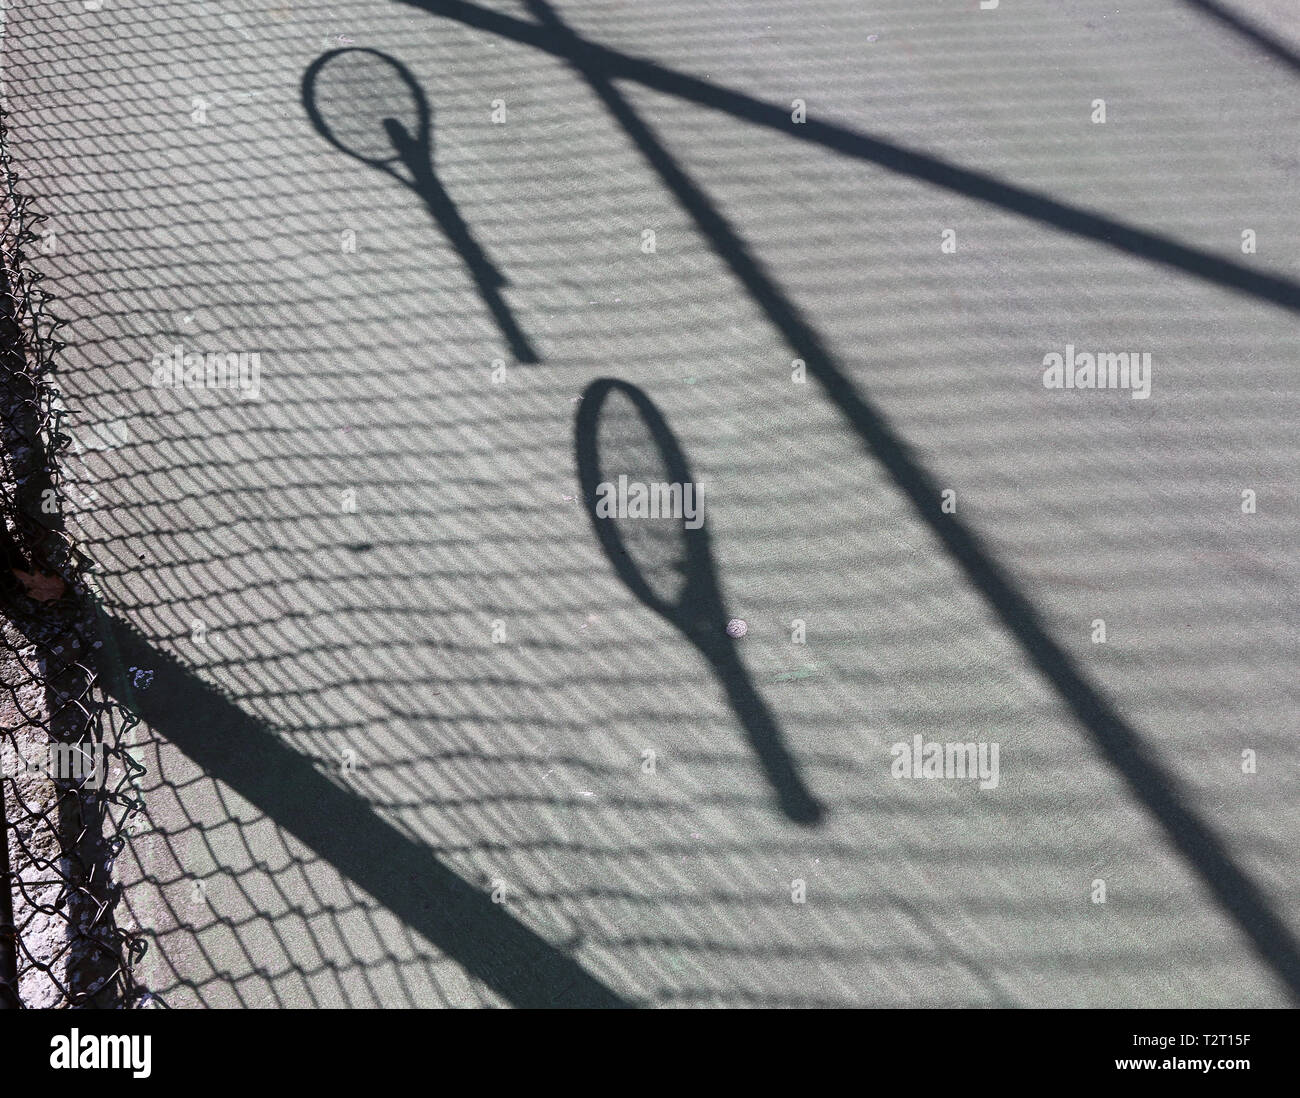 Shadows of tennis rackets on the ground Stock Photo